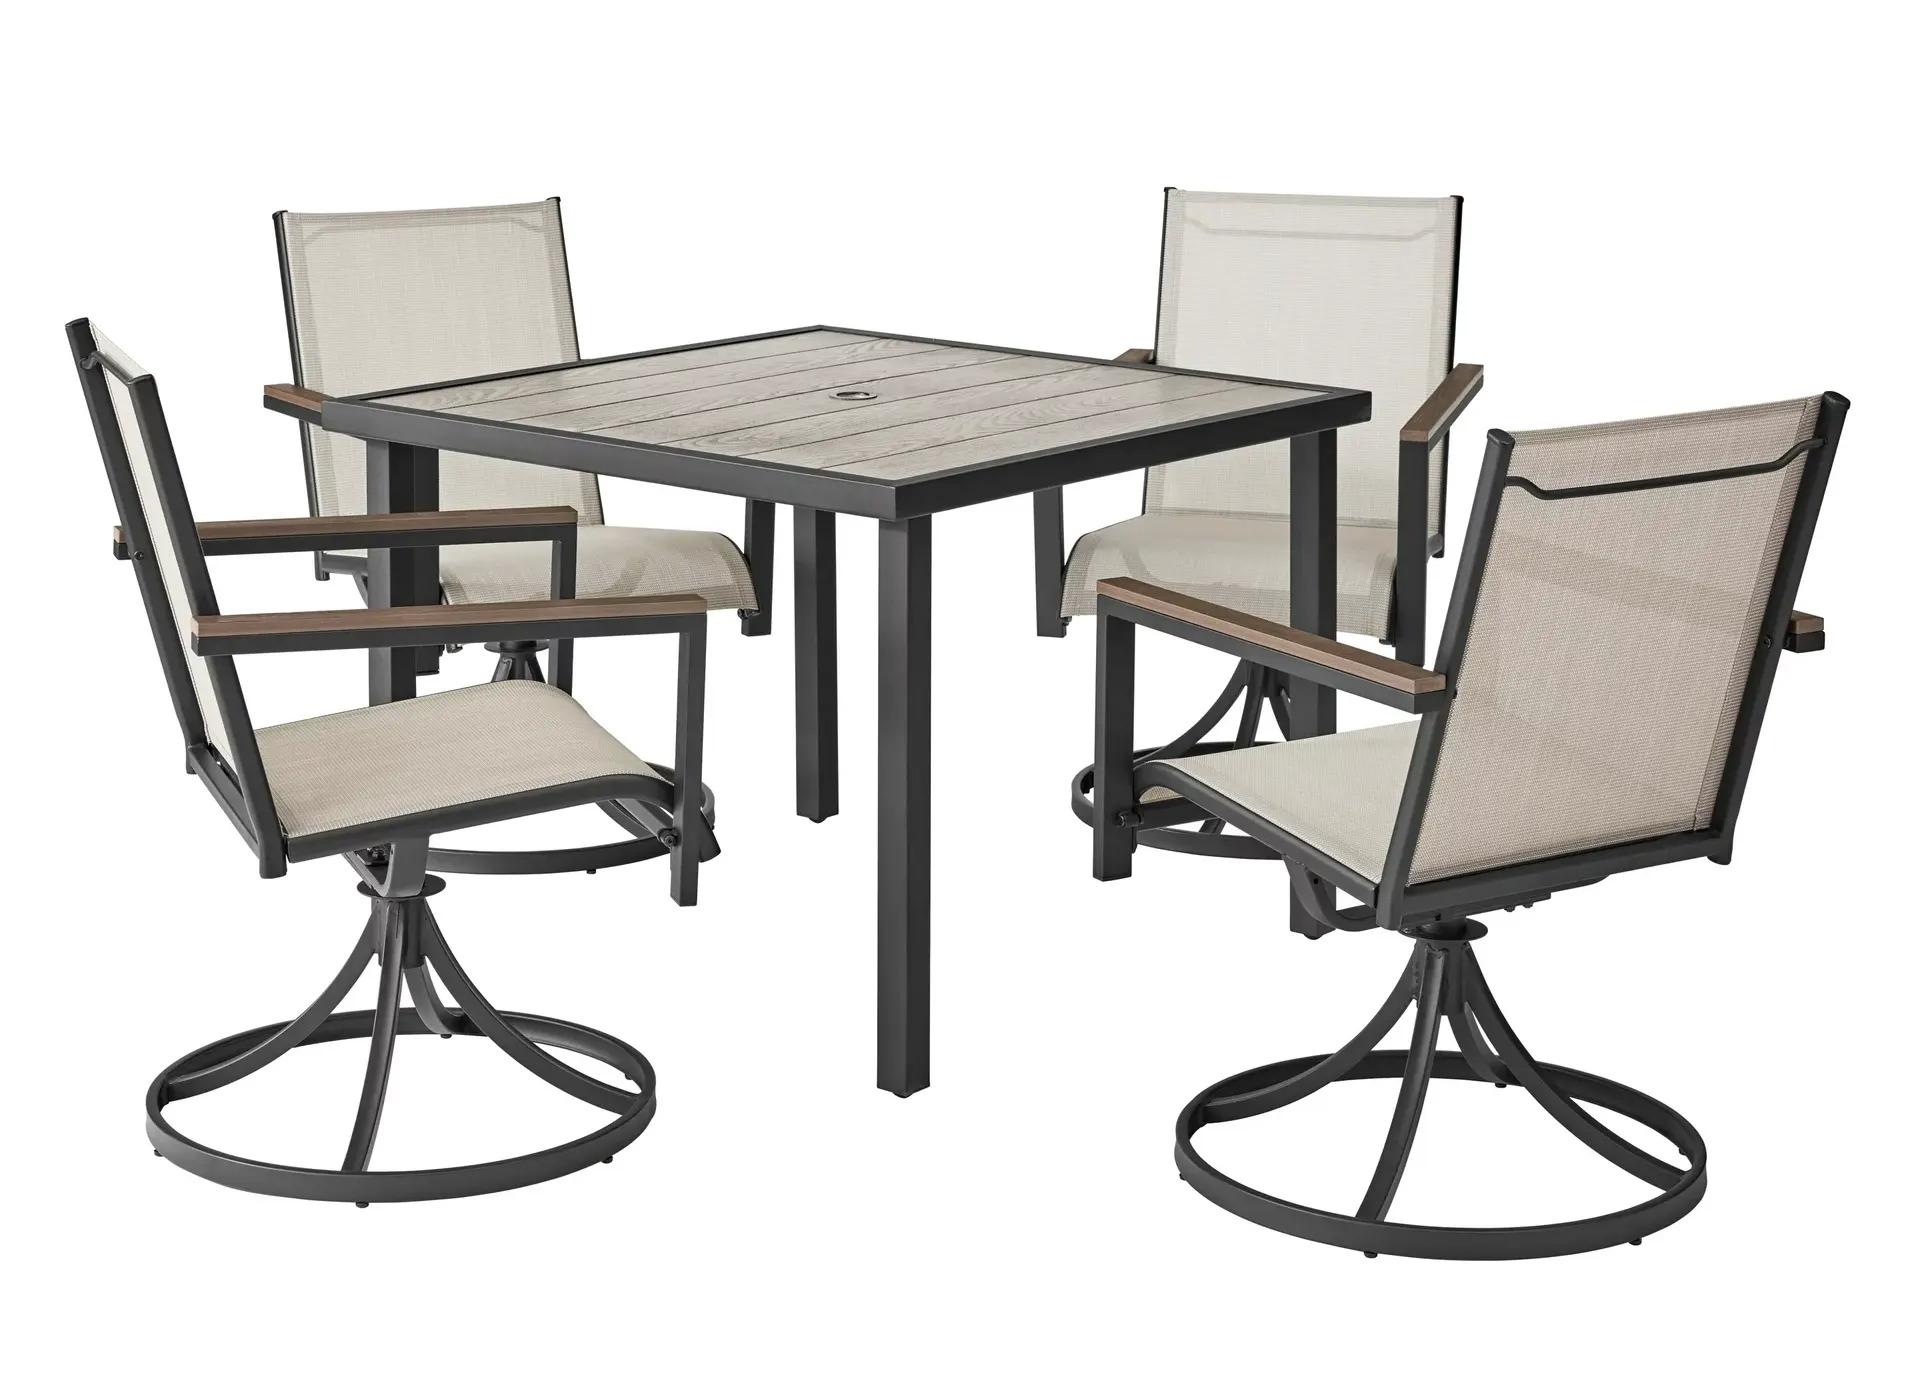 Better Homes and Gardens Brees 5-Piece Swivel Dining Set for $269 Shipped